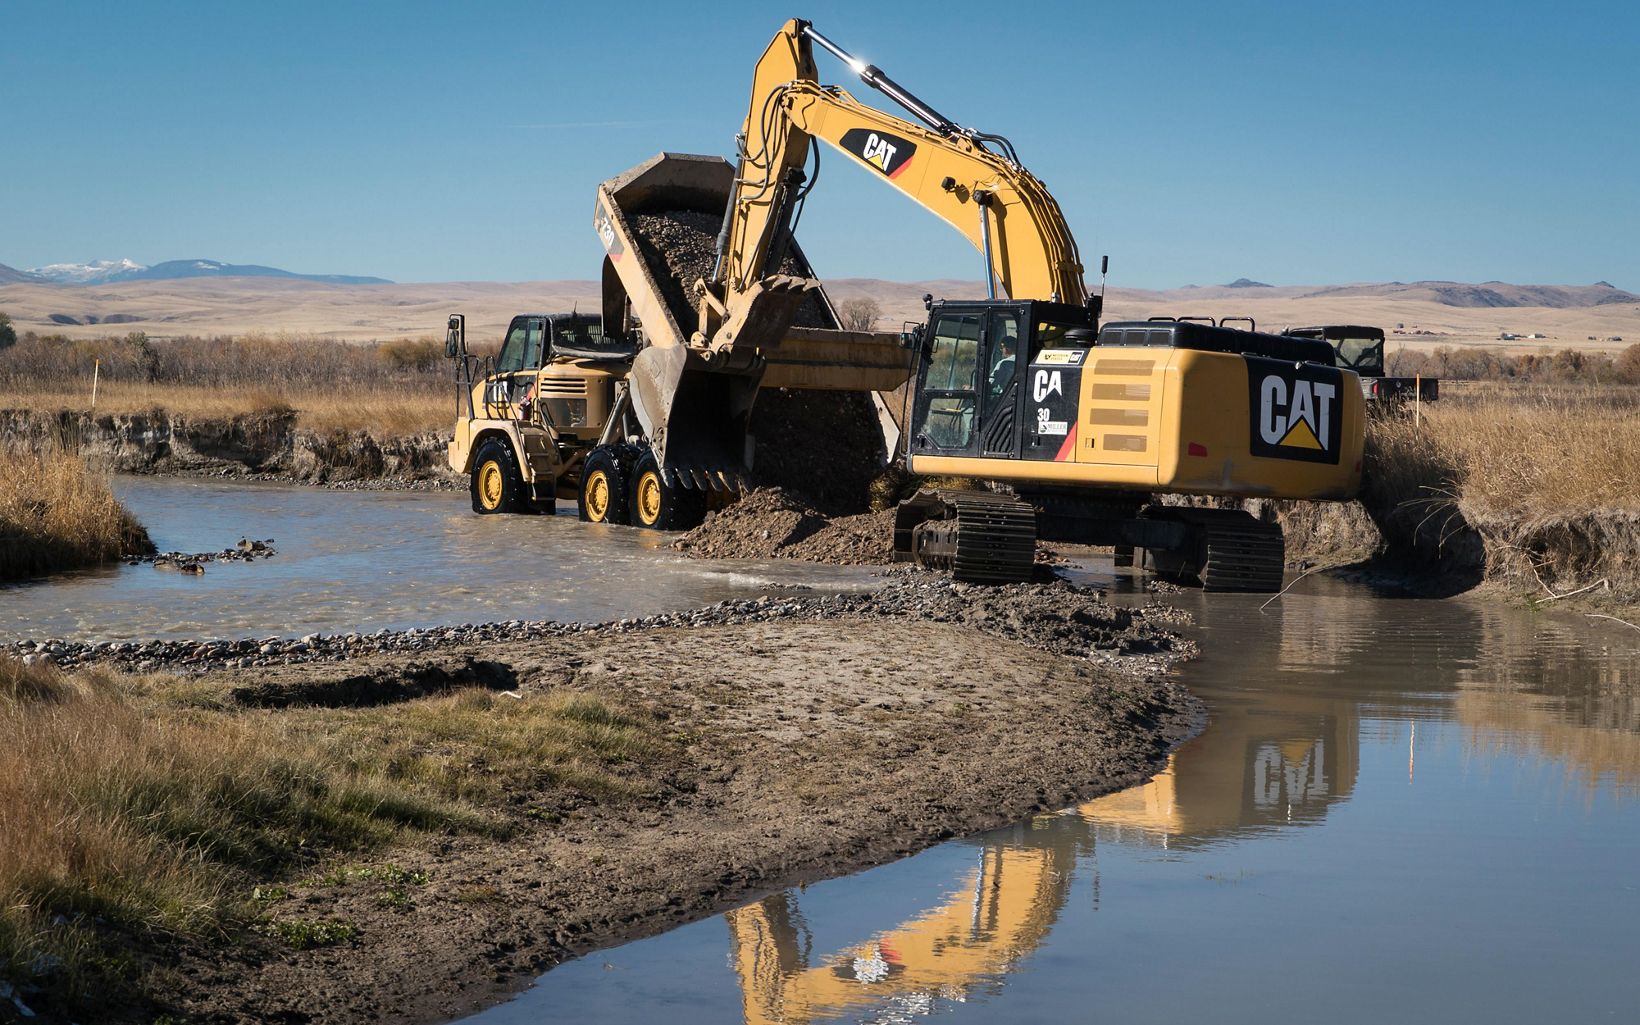 Ruby River restoration Heavy equipment was used to raise the level of the Ruby River's deeply incised channel. © Jeremy Roberts/Conservation Media